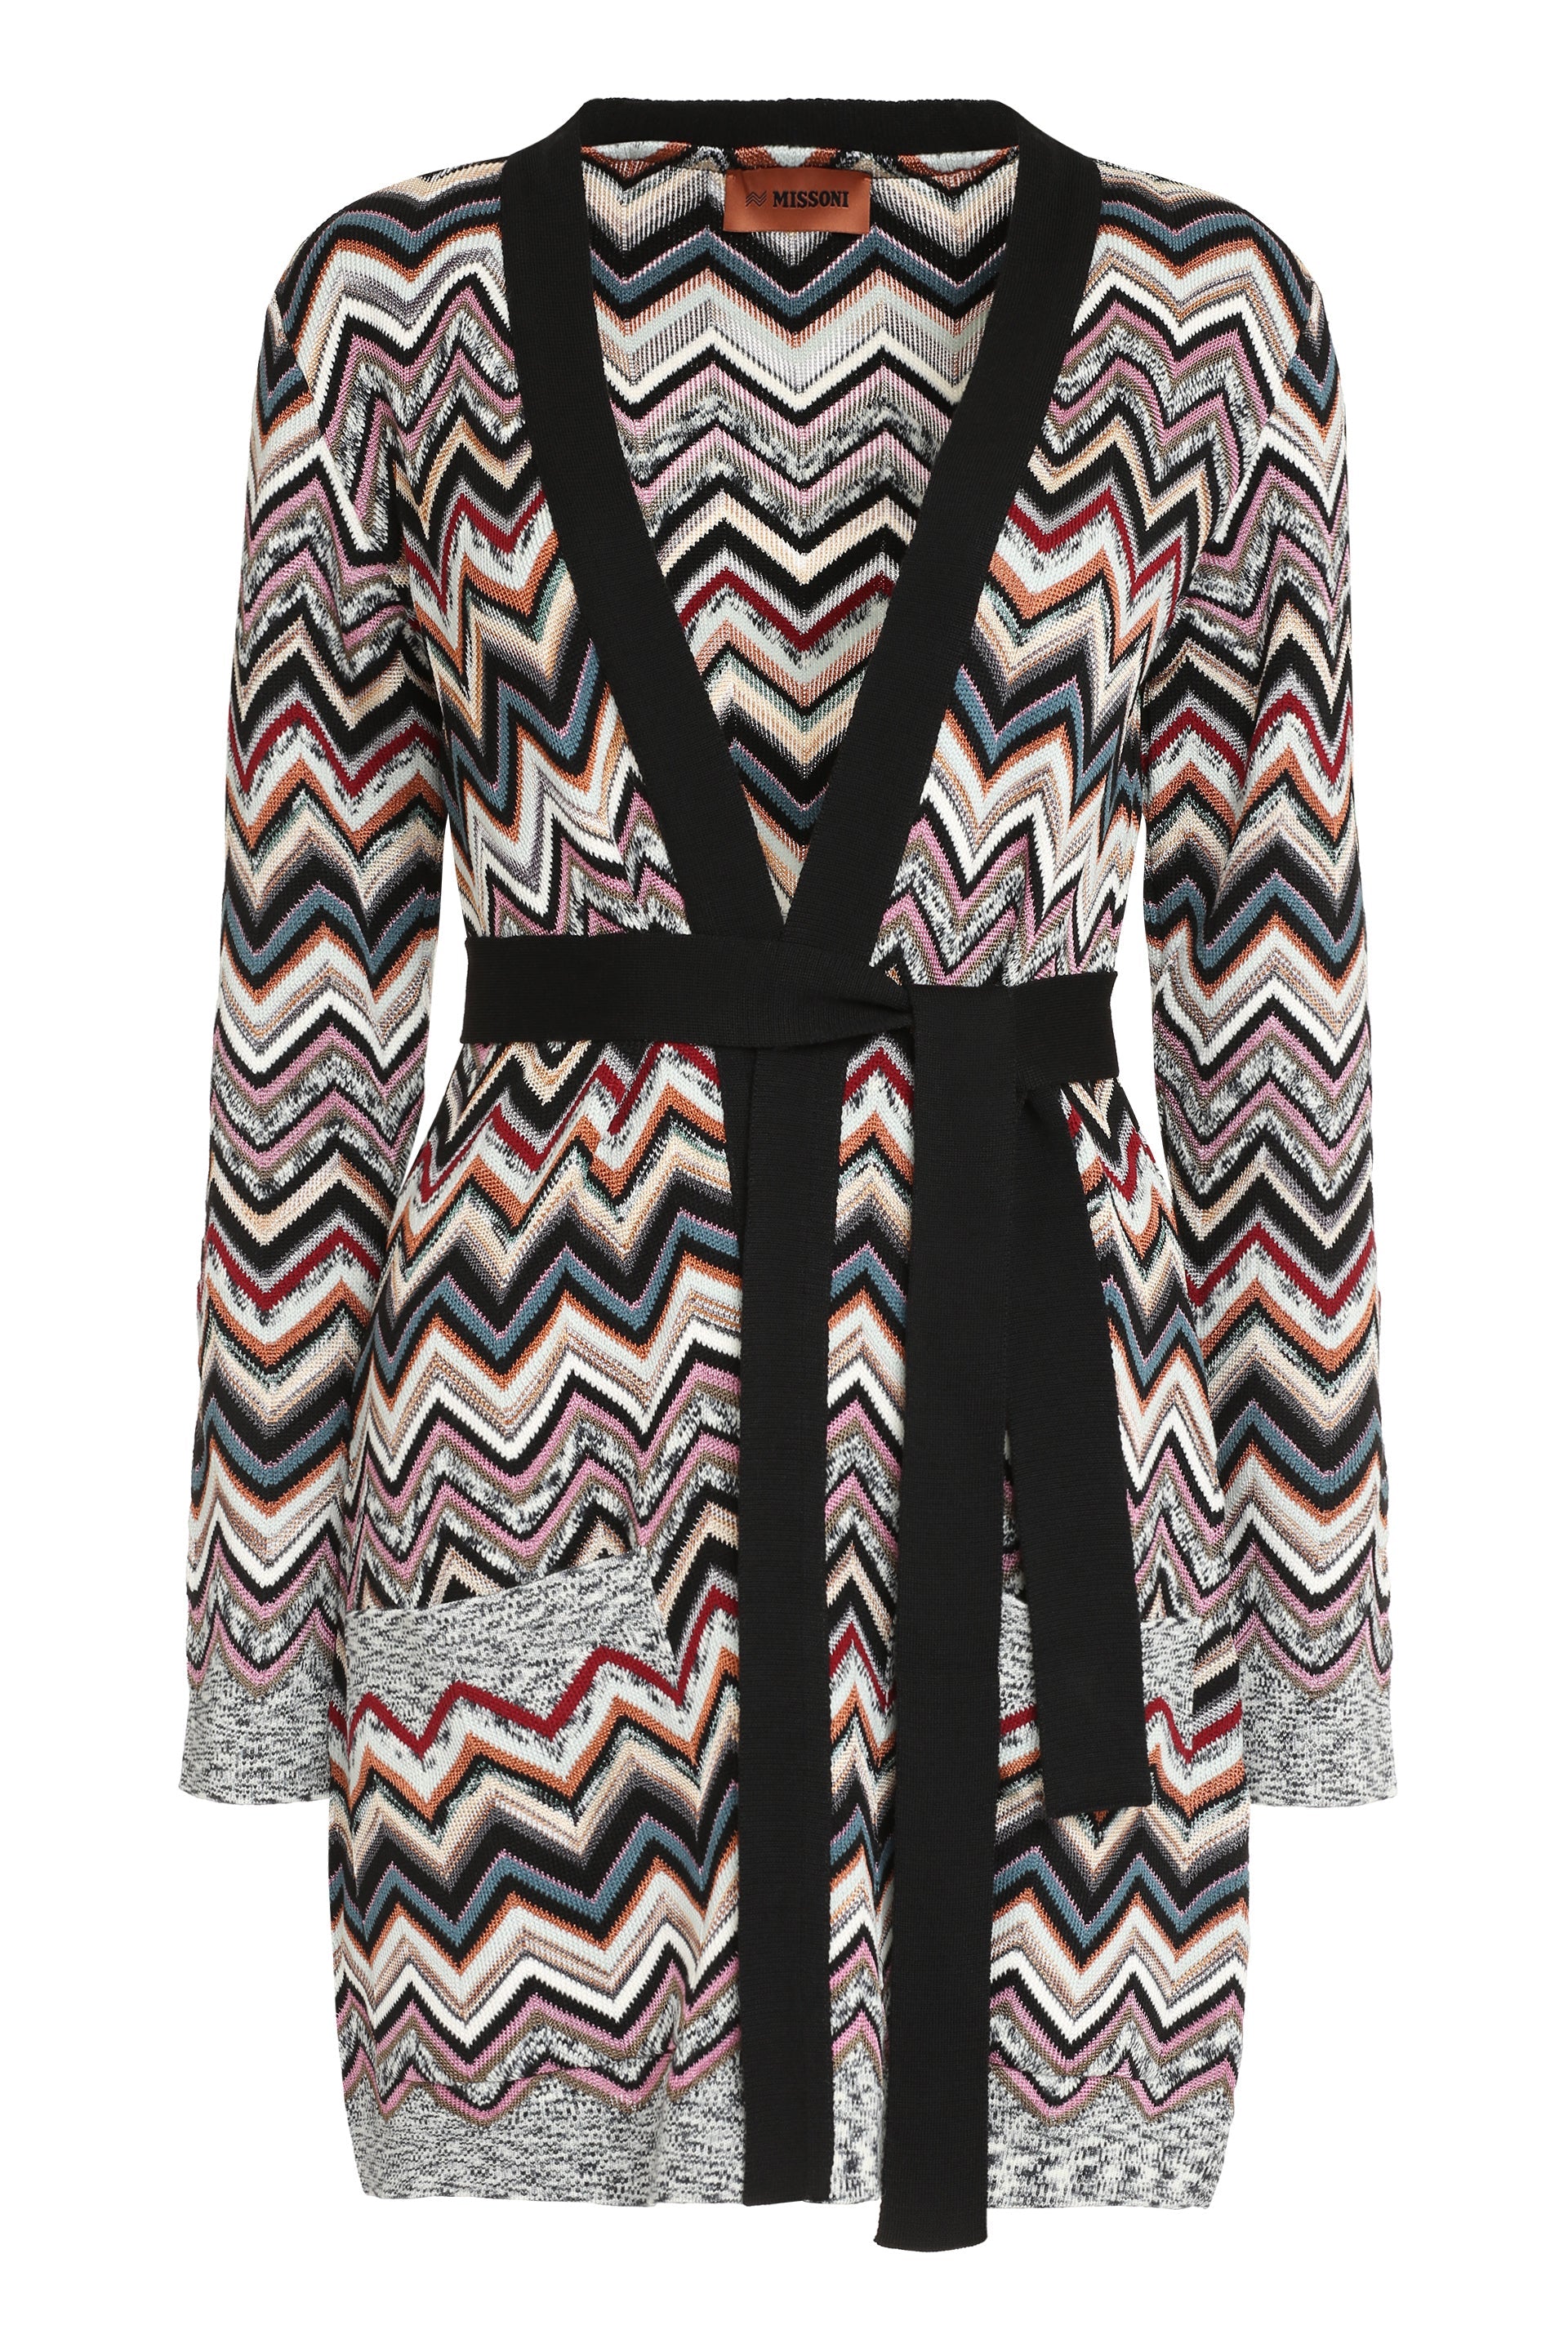 Missoni-OUTLET-SALE-Jacquard-wool-cardigan-Strick-40-ARCHIVE-COLLECTION.jpg